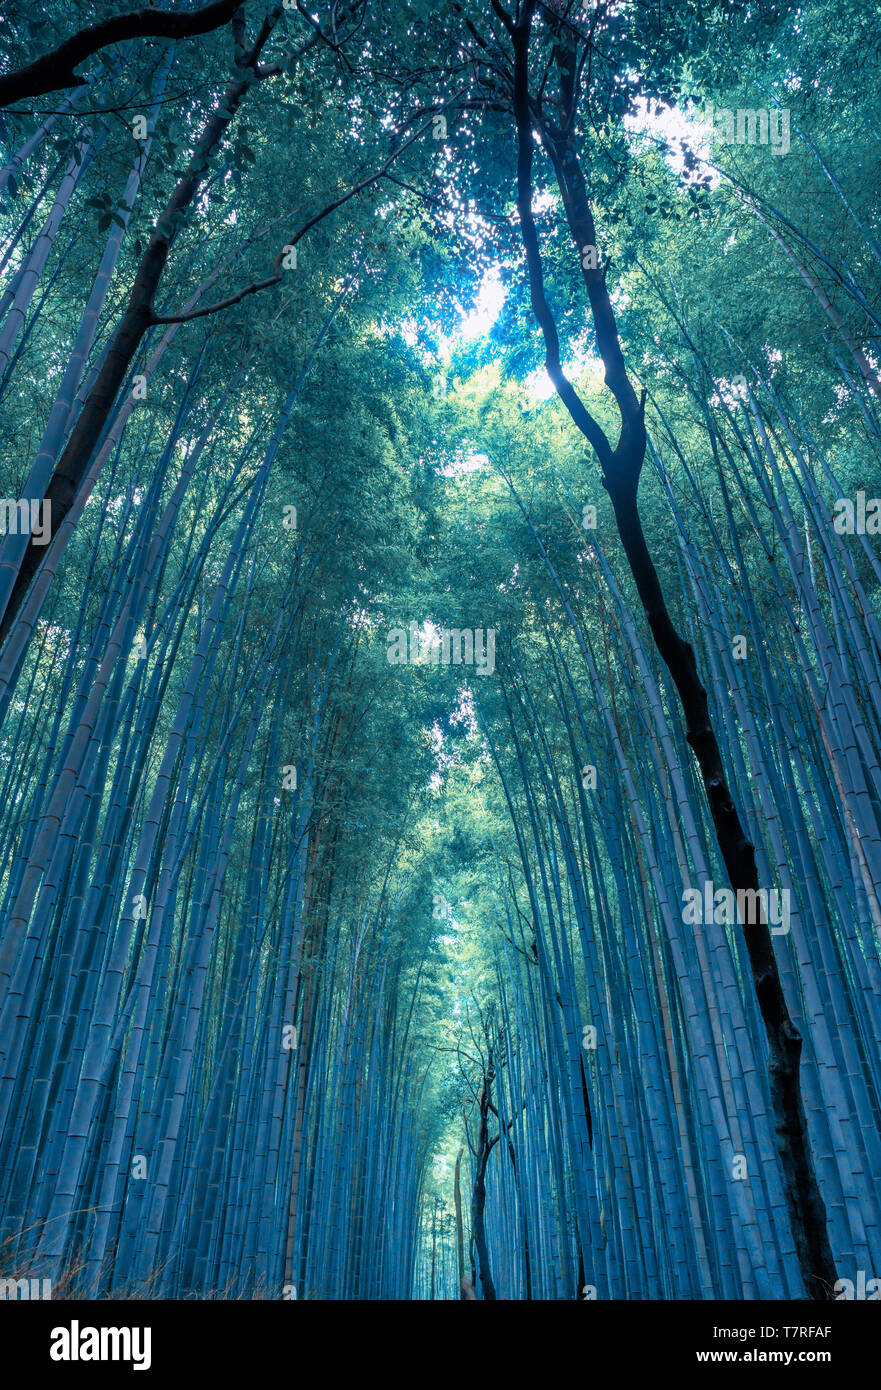 Bamboo Forest Kyoto Stock Photo